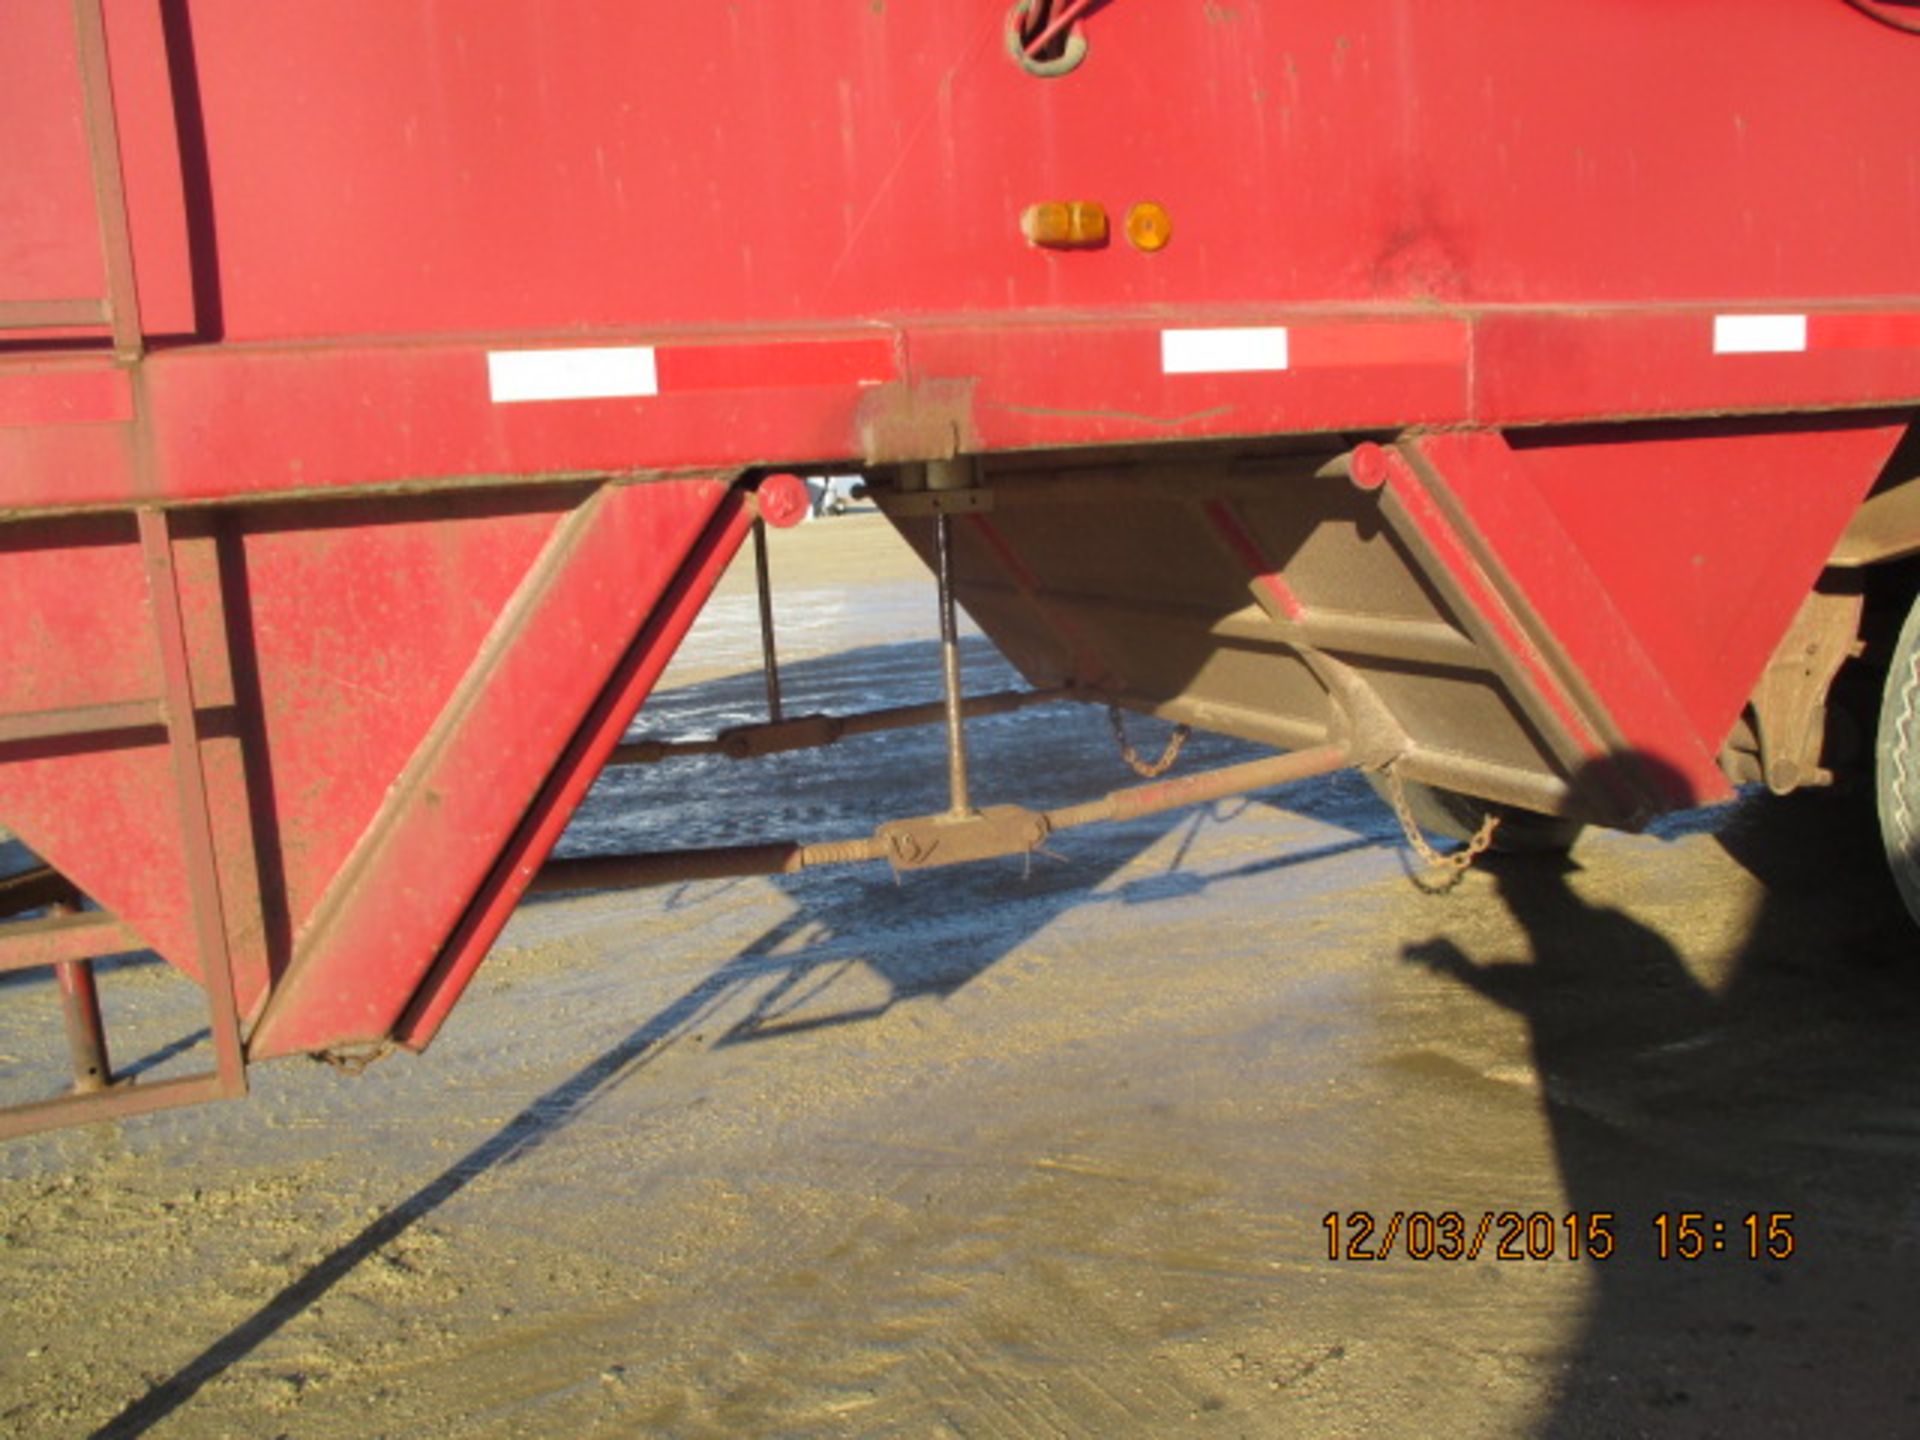 TITLE-Homemade tri-axle belly dump, VIN:HMDS834309R003175, unit BD-08 - Image 4 of 5